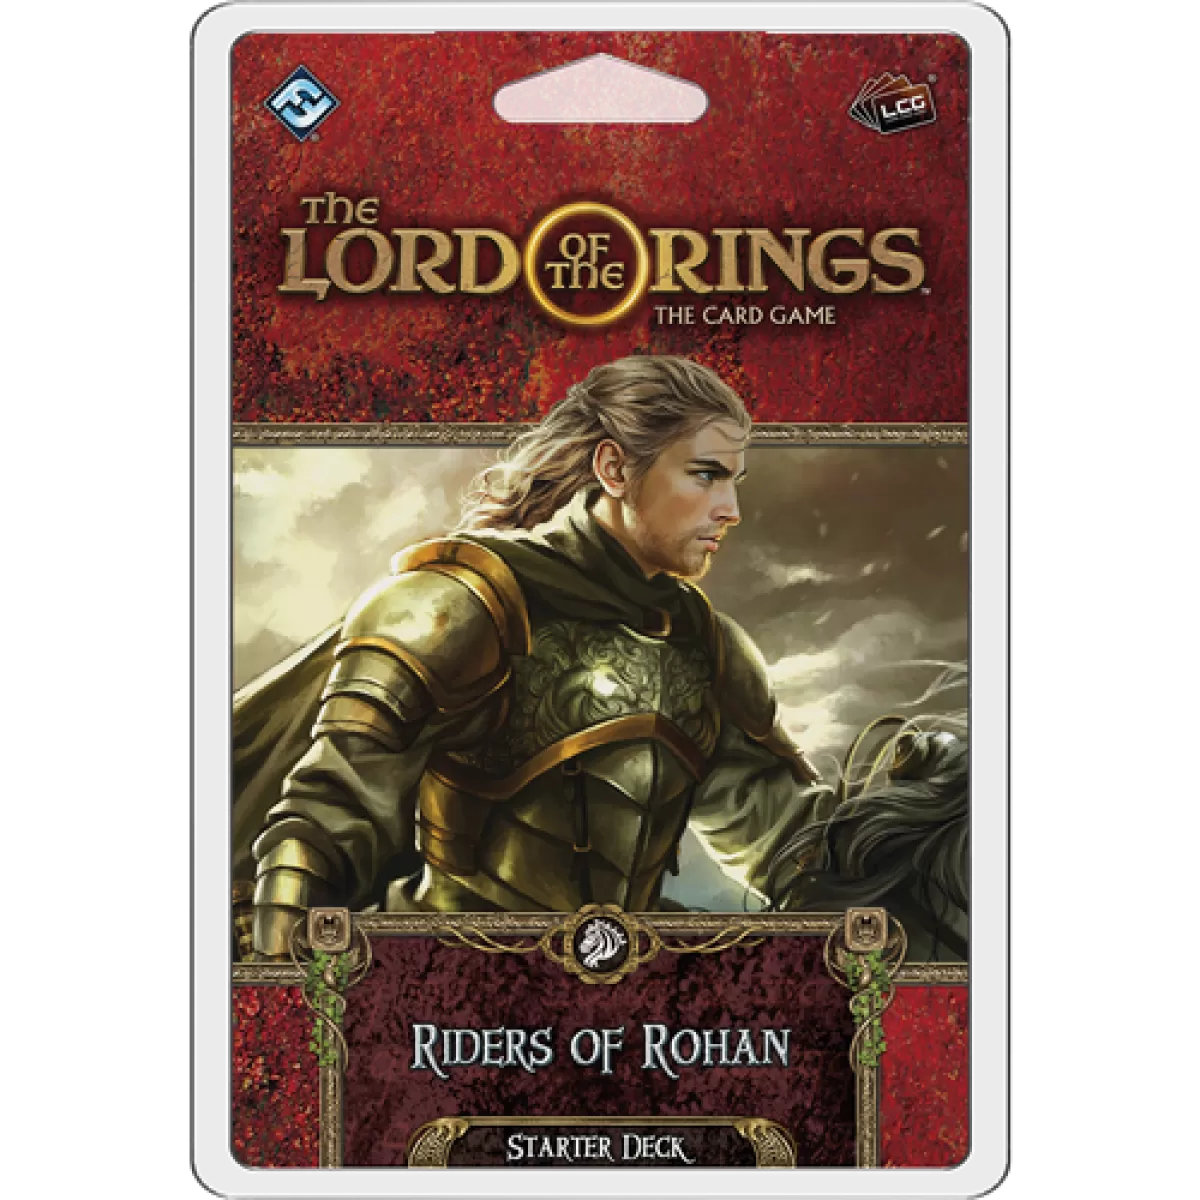 The Lord of the Rings LCG - Riders of Rohan Starter Deck